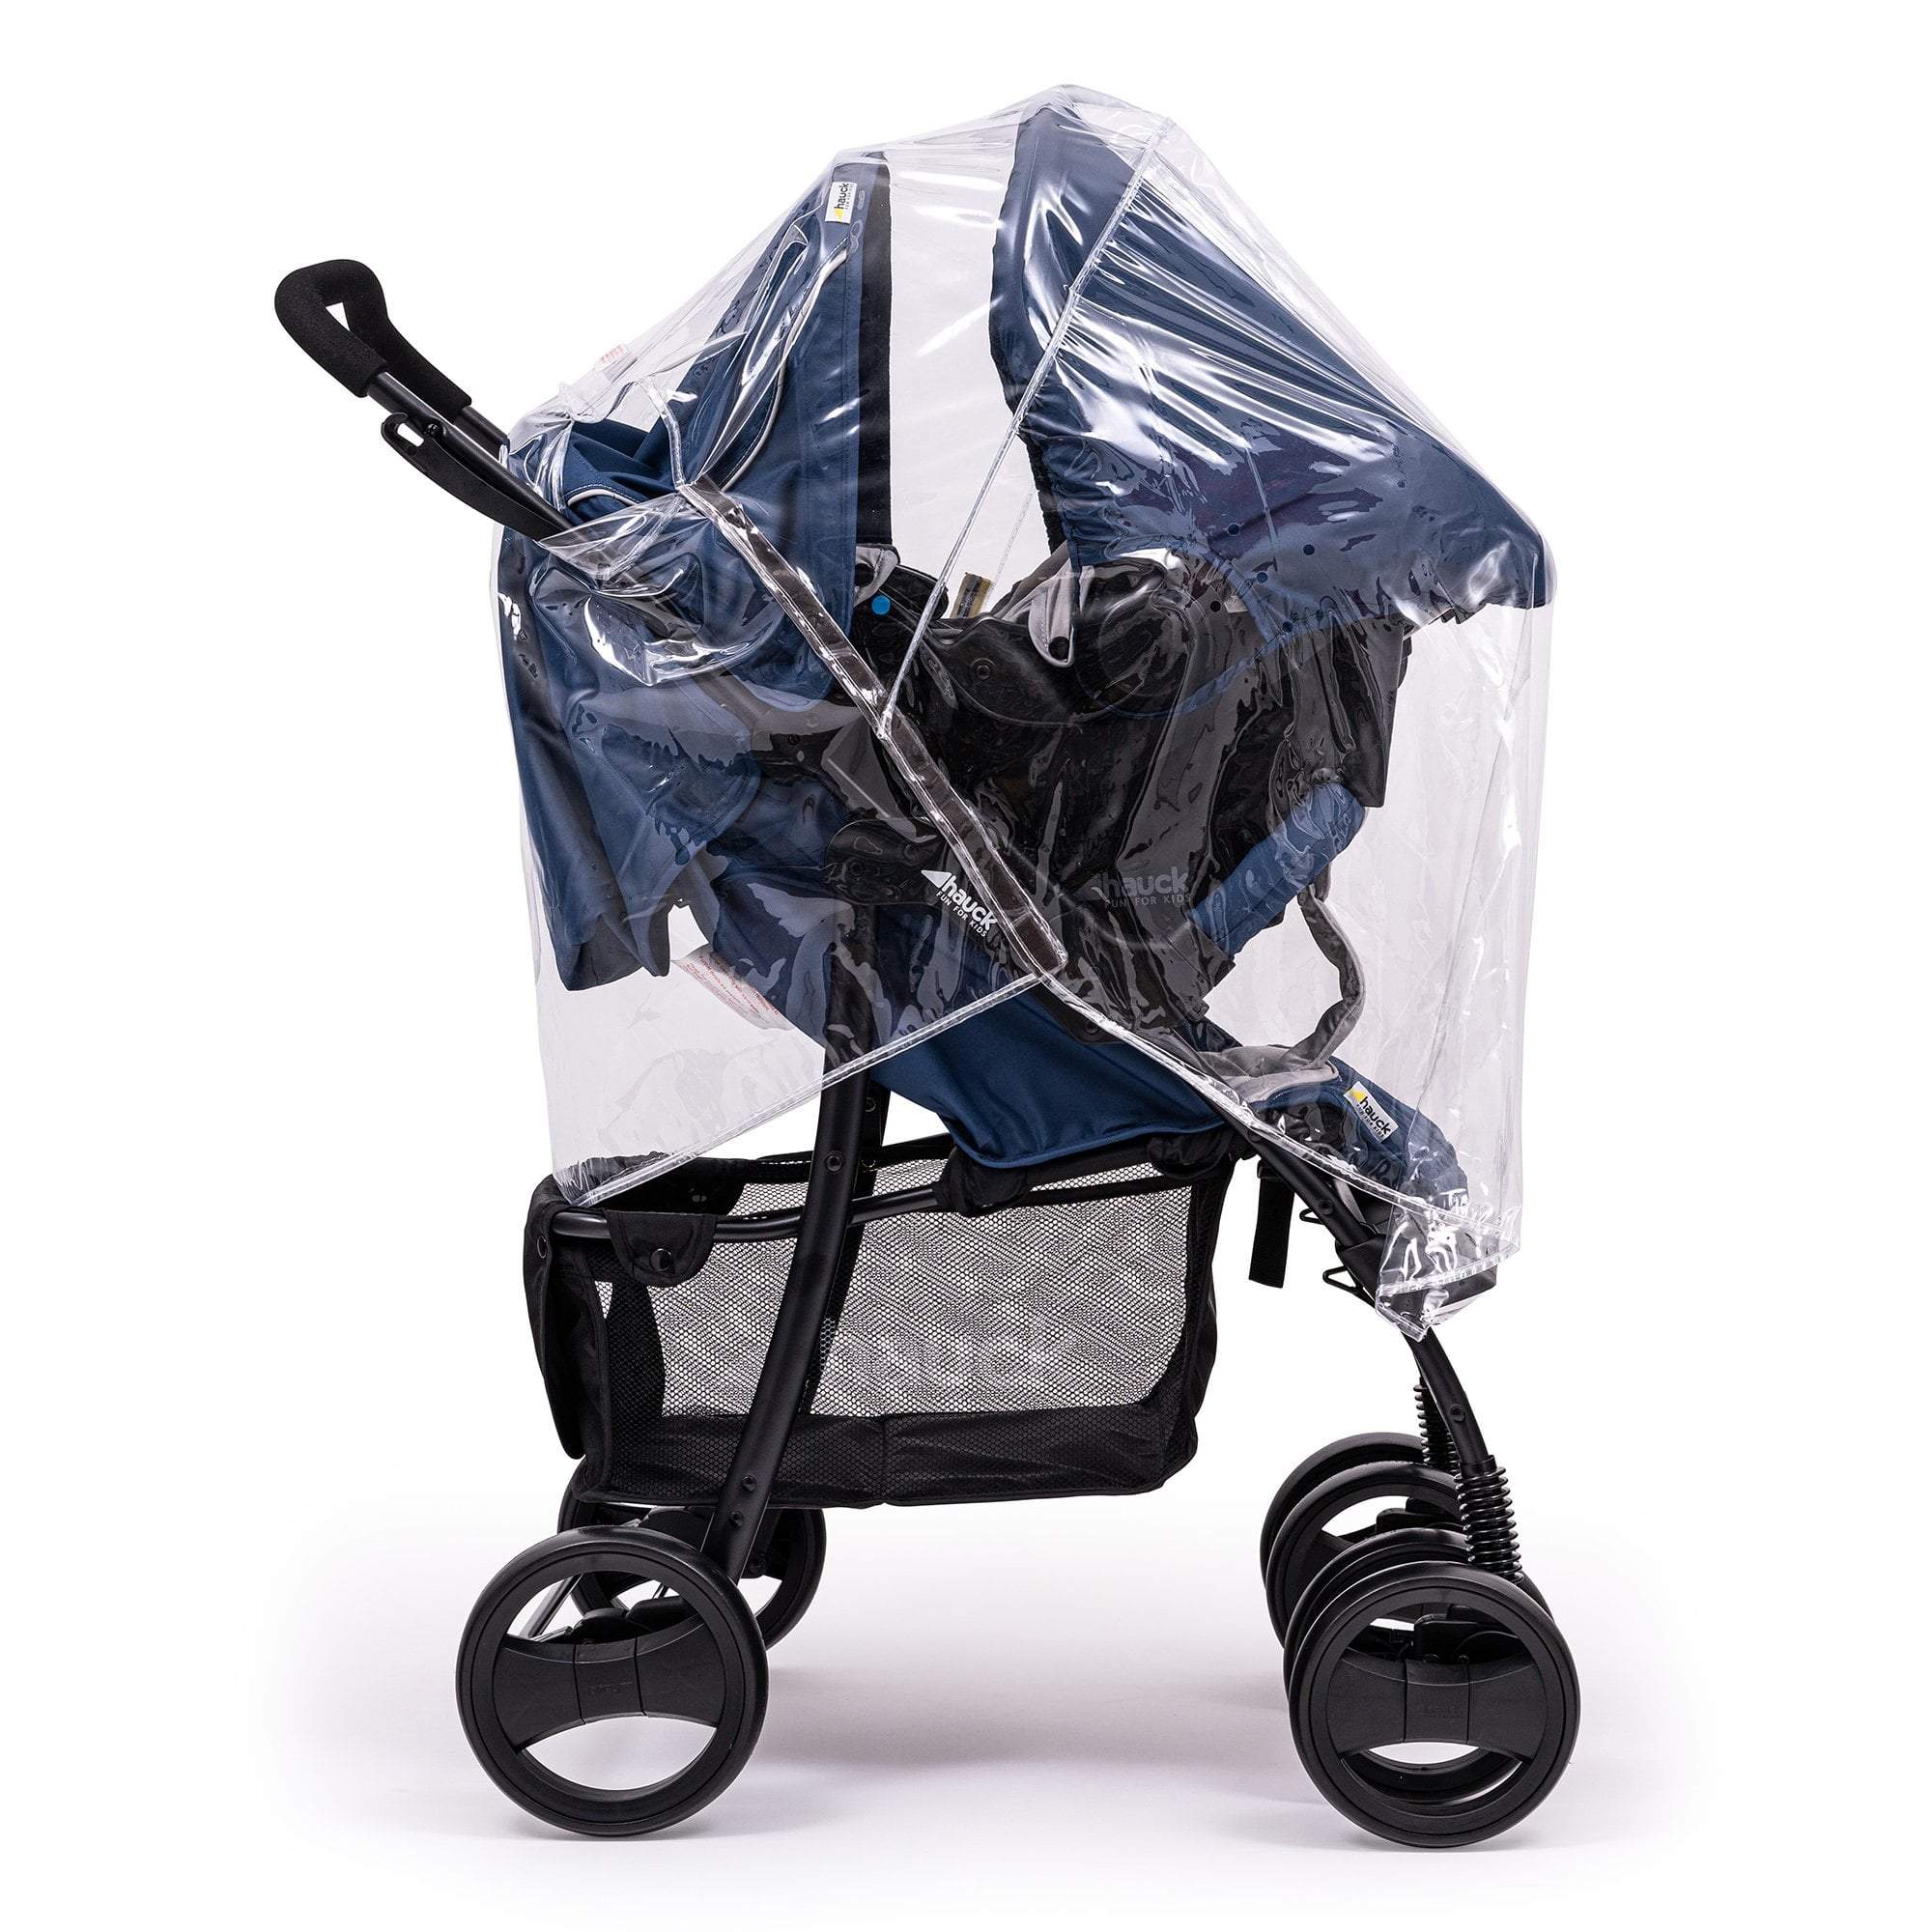 Travel System Raincover Compatible with Babyzen - Fits All Models -  | For Your Little One